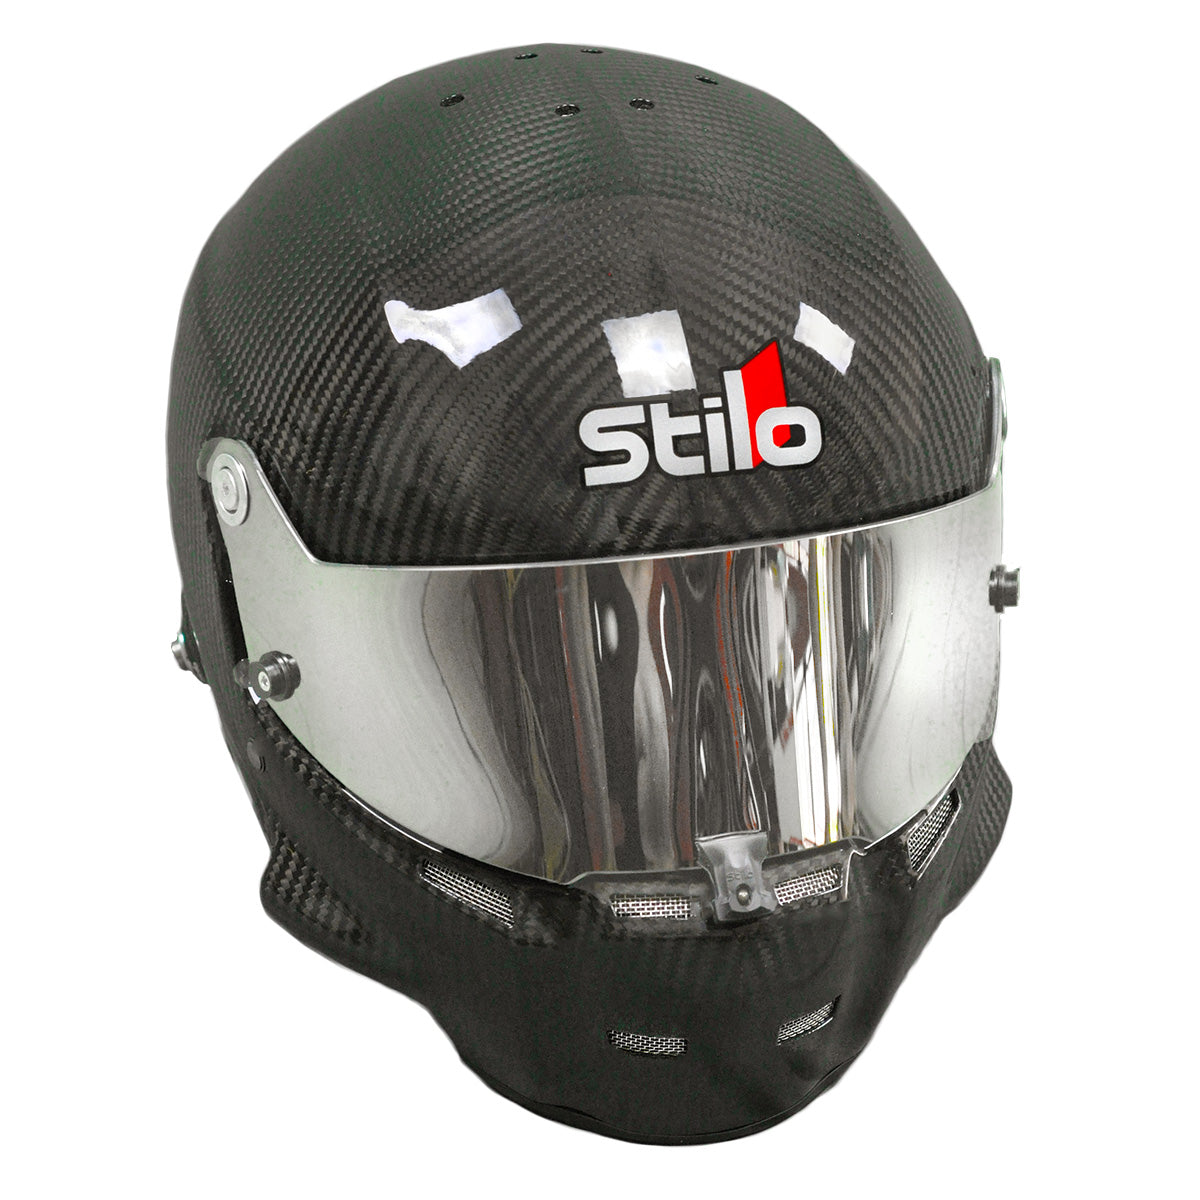 Stilo mirrored ST5 ST5.1 auto racing helmet visor immediate shipping from Competition Motorsport.